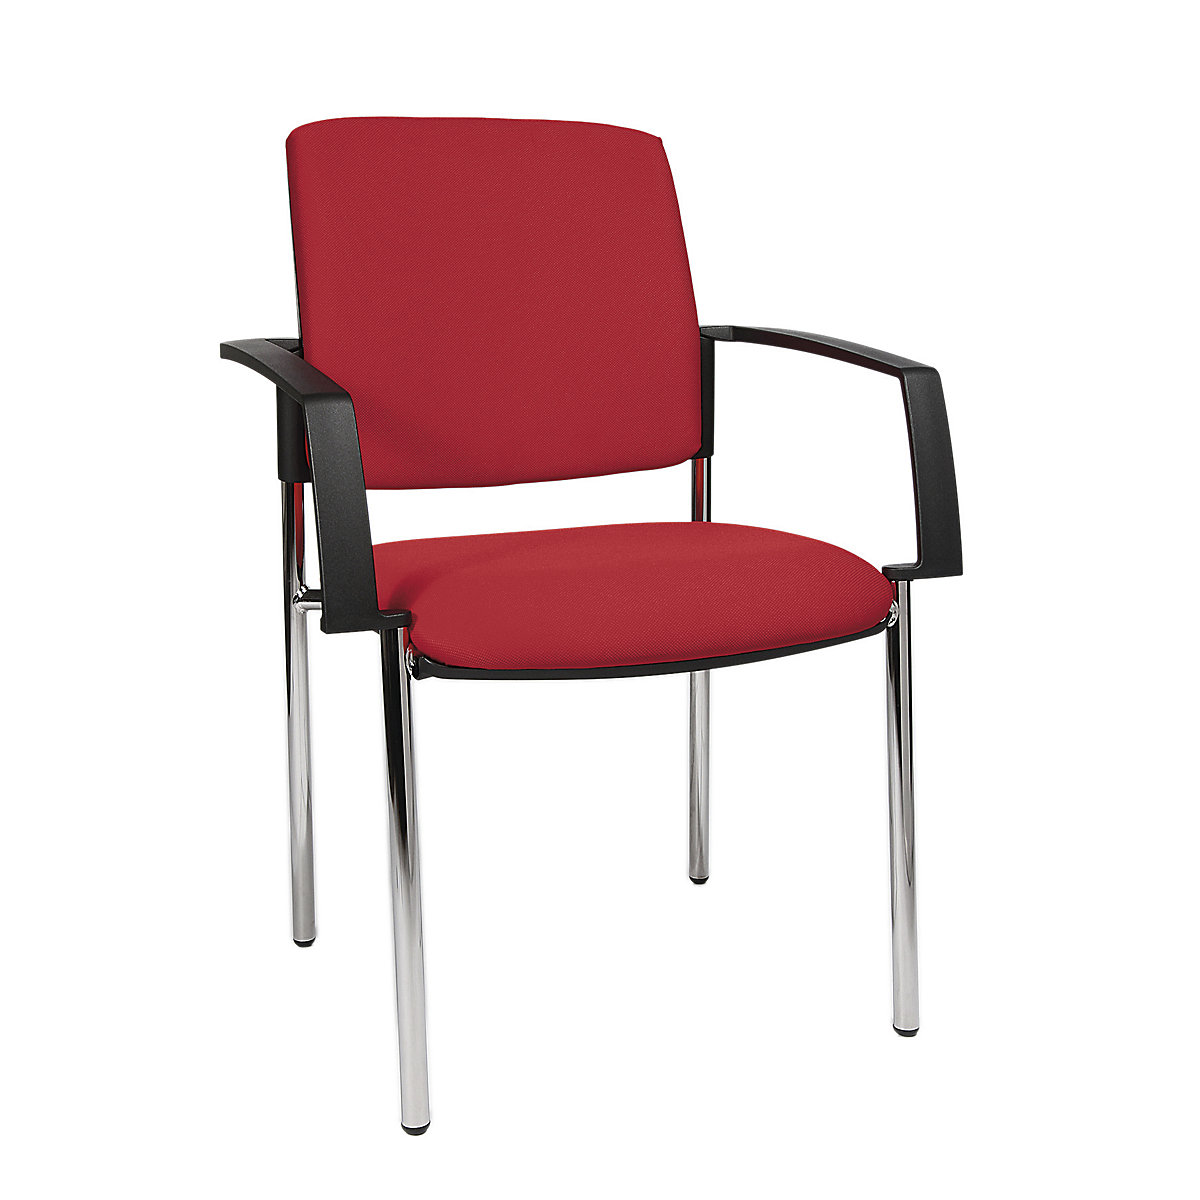 Padded stacking chair – Topstar